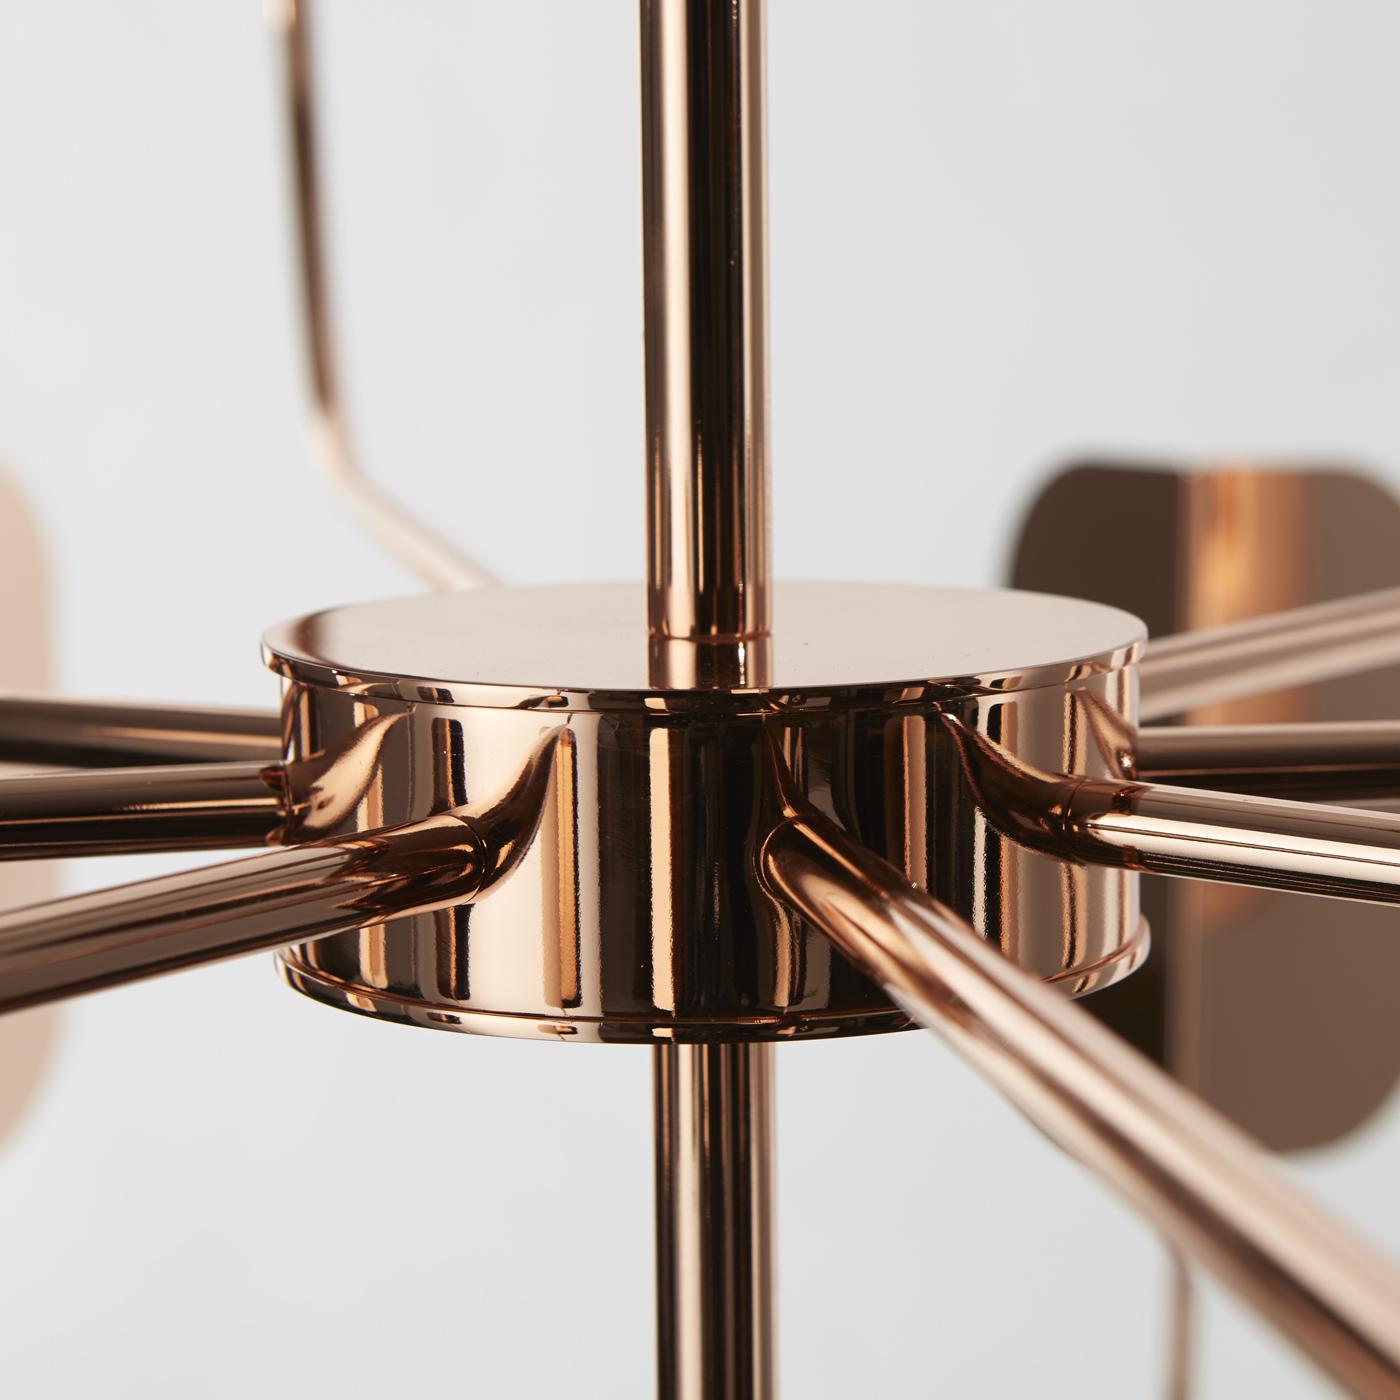 This striking twelve LED lights chandelier in two tiers has a delicate structure in hand forged iron with a polished copper finish and was designed by Matteo Zorzenoni. Its timeless look makes this piece versatile and adaptable to a Classic decor